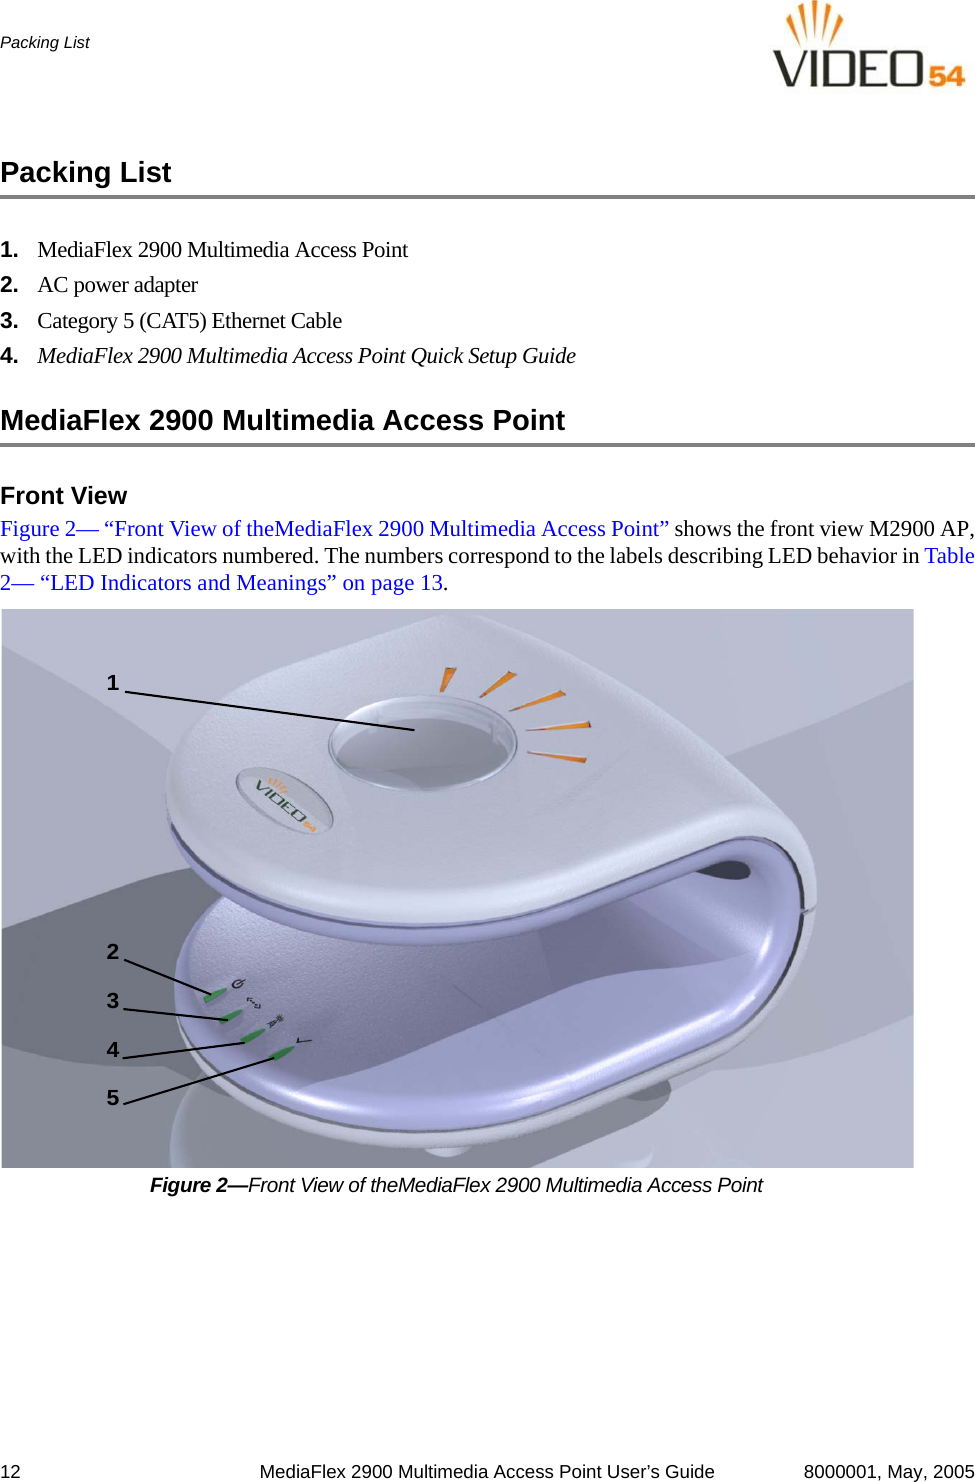 12 MediaFlex 2900 Multimedia Access Point User’s Guide 8000001, May, 2005Packing ListPacking List1. MediaFlex 2900 Multimedia Access Point2. AC power adapter3. Category 5 (CAT5) Ethernet Cable4. MediaFlex 2900 Multimedia Access Point Quick Setup GuideMediaFlex 2900 Multimedia Access PointFront ViewFigure 2— “Front View of theMediaFlex 2900 Multimedia Access Point” shows the front view M2900 AP,with the LED indicators numbered. The numbers correspond to the labels describing LED behavior in Table2— “LED Indicators and Meanings” on page 13.Figure 2—Front View of theMediaFlex 2900 Multimedia Access Point 12345